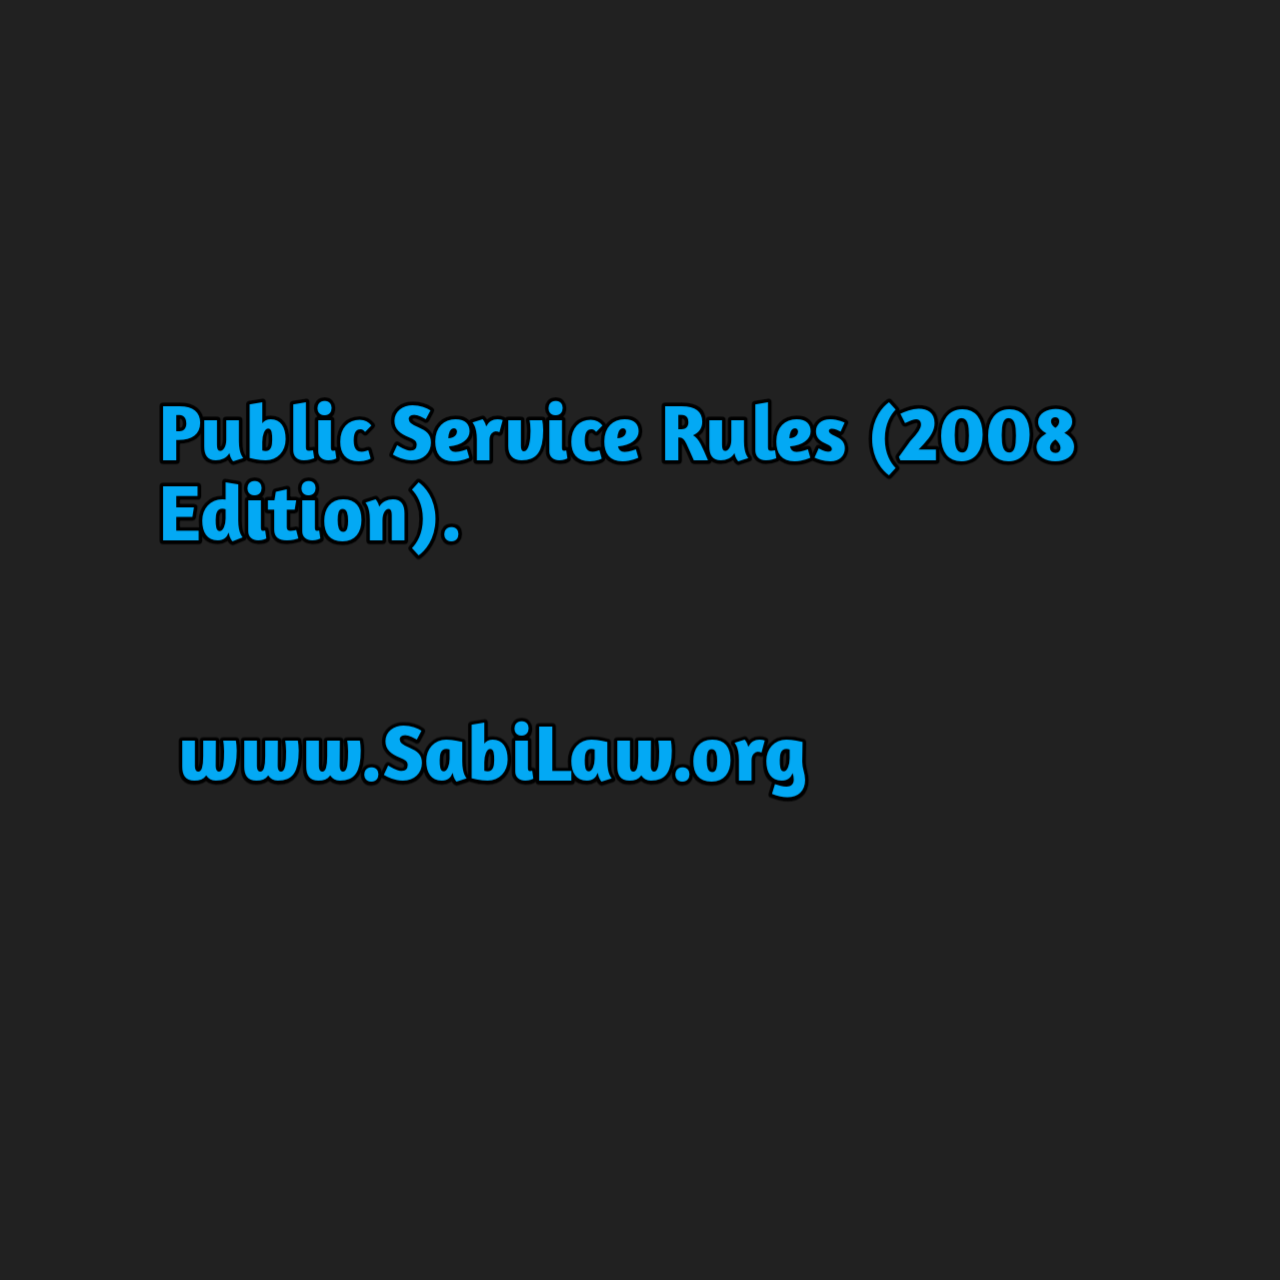 Click to download a copy of the Public Service Rules (2008 Edition).